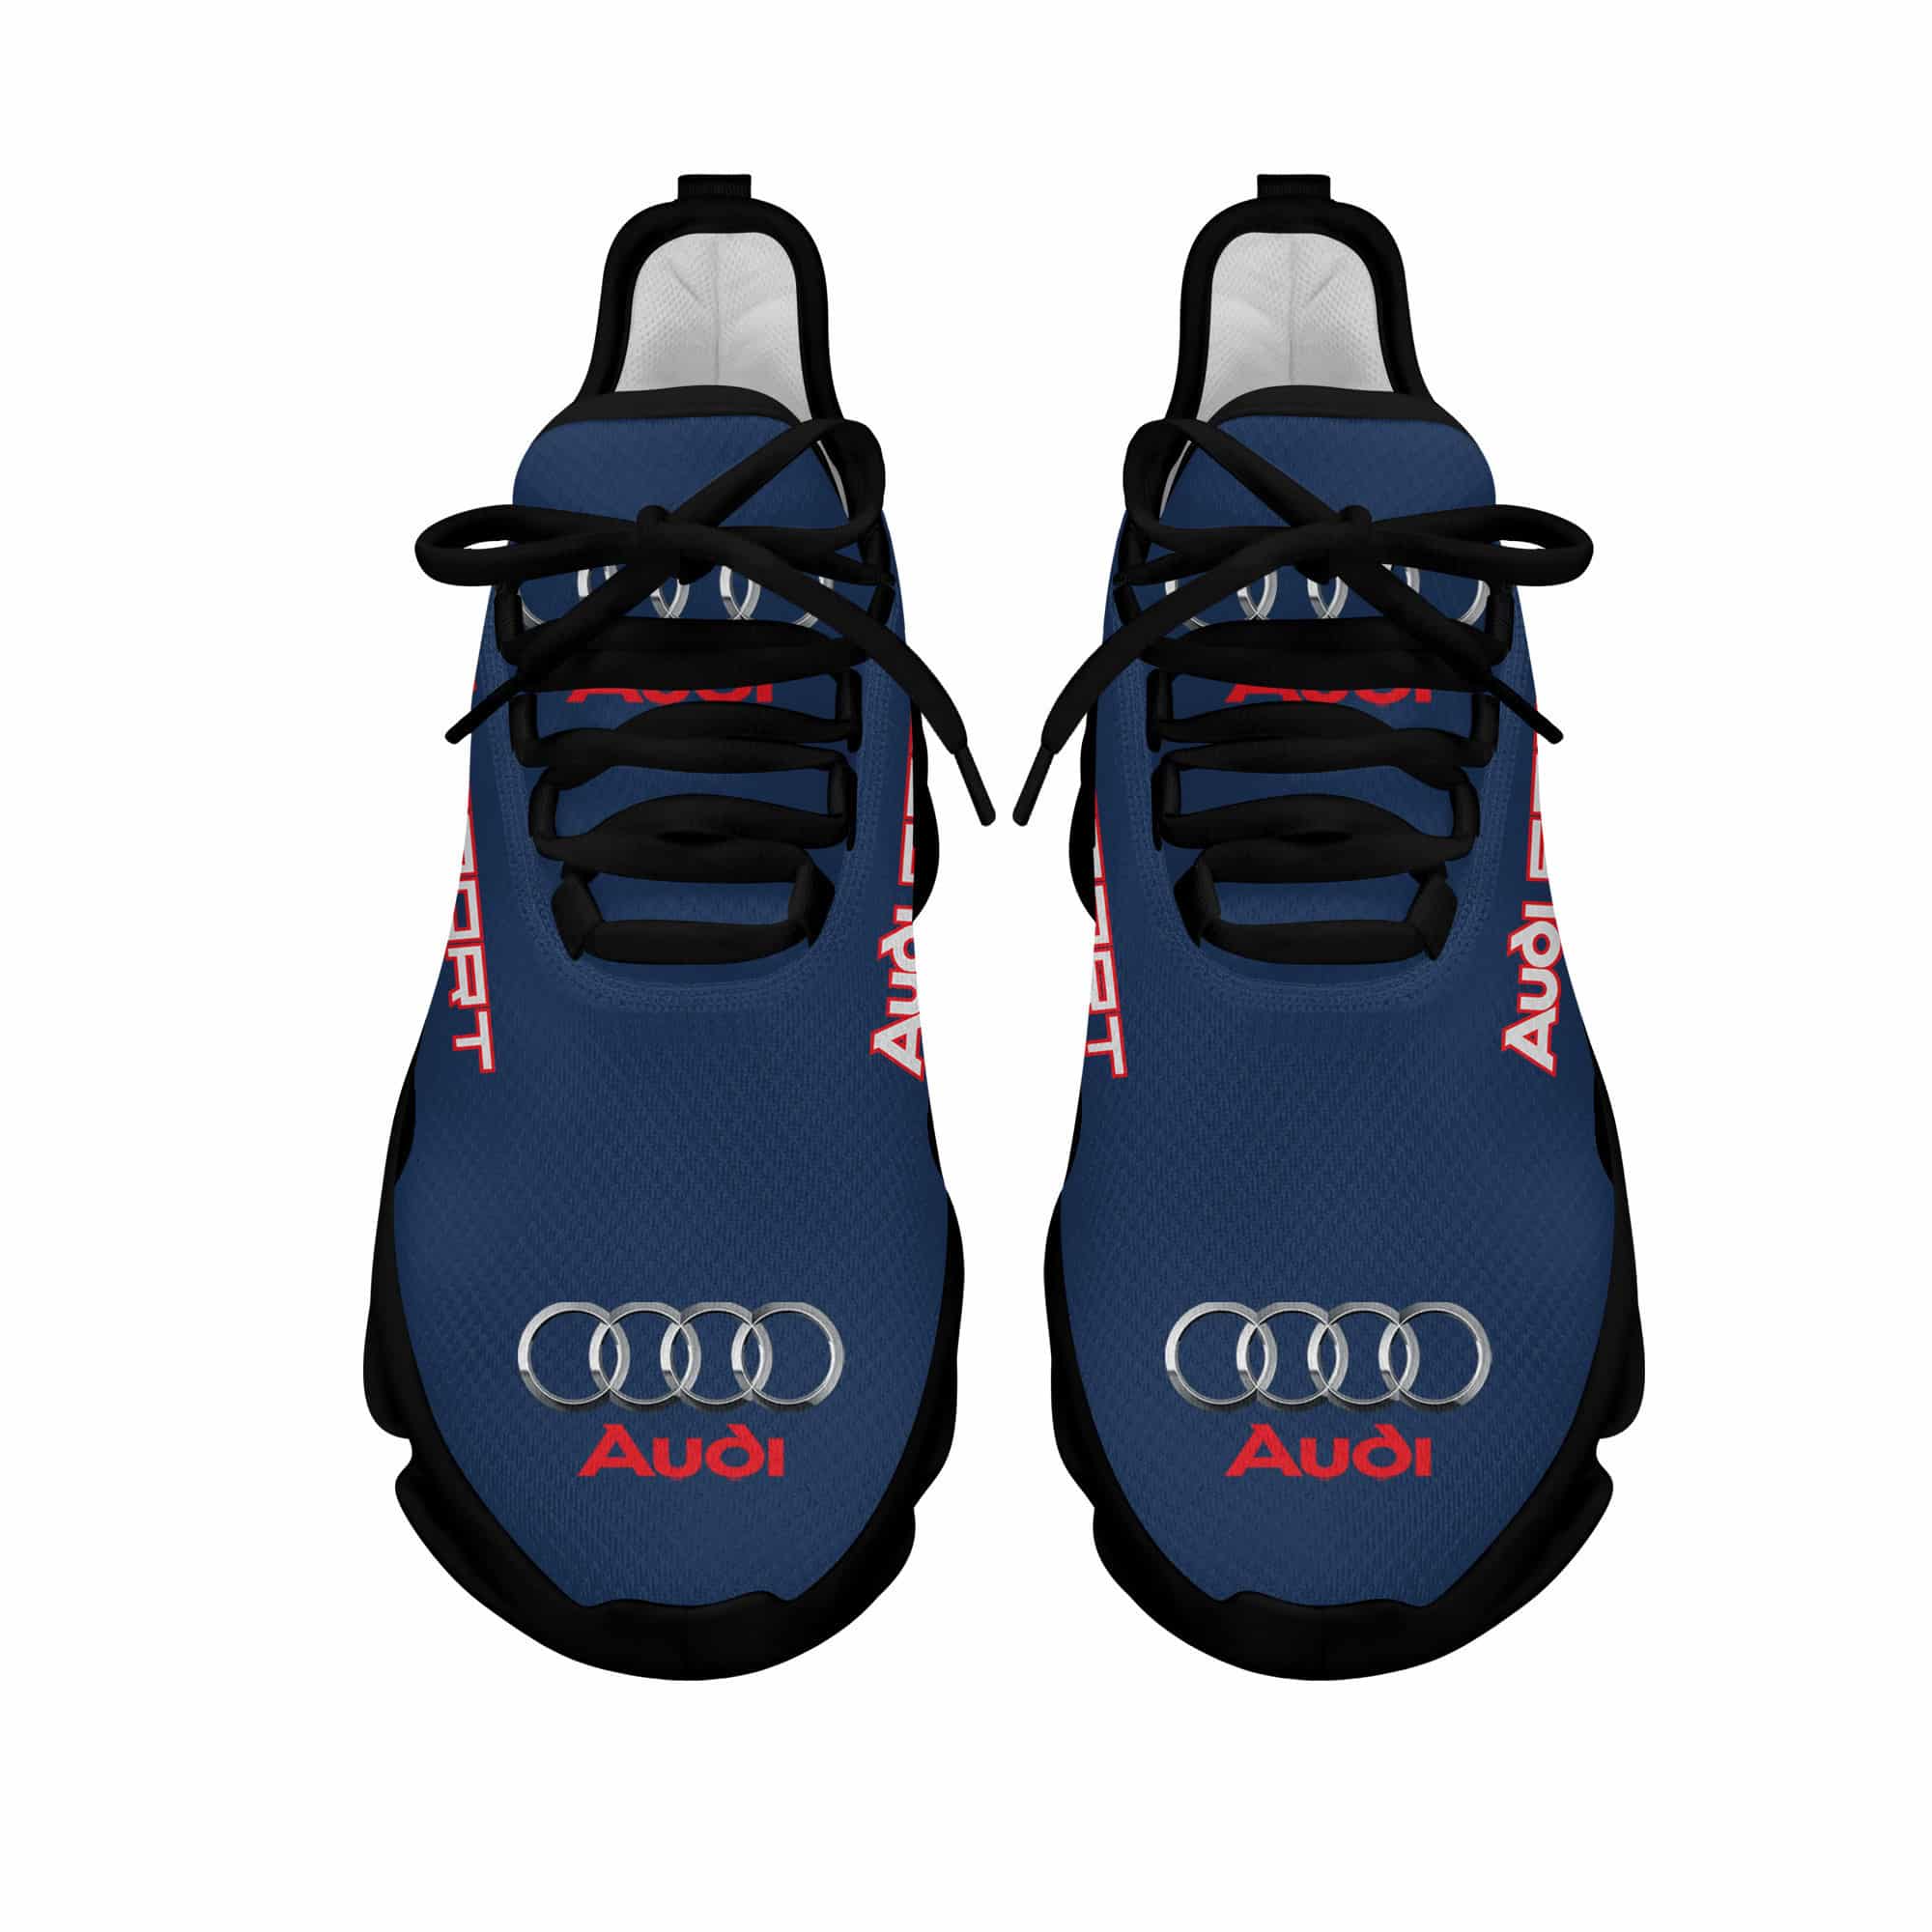 Audi Sport Running Shoes Max Soul Shoes Sneakers Ver 2 3